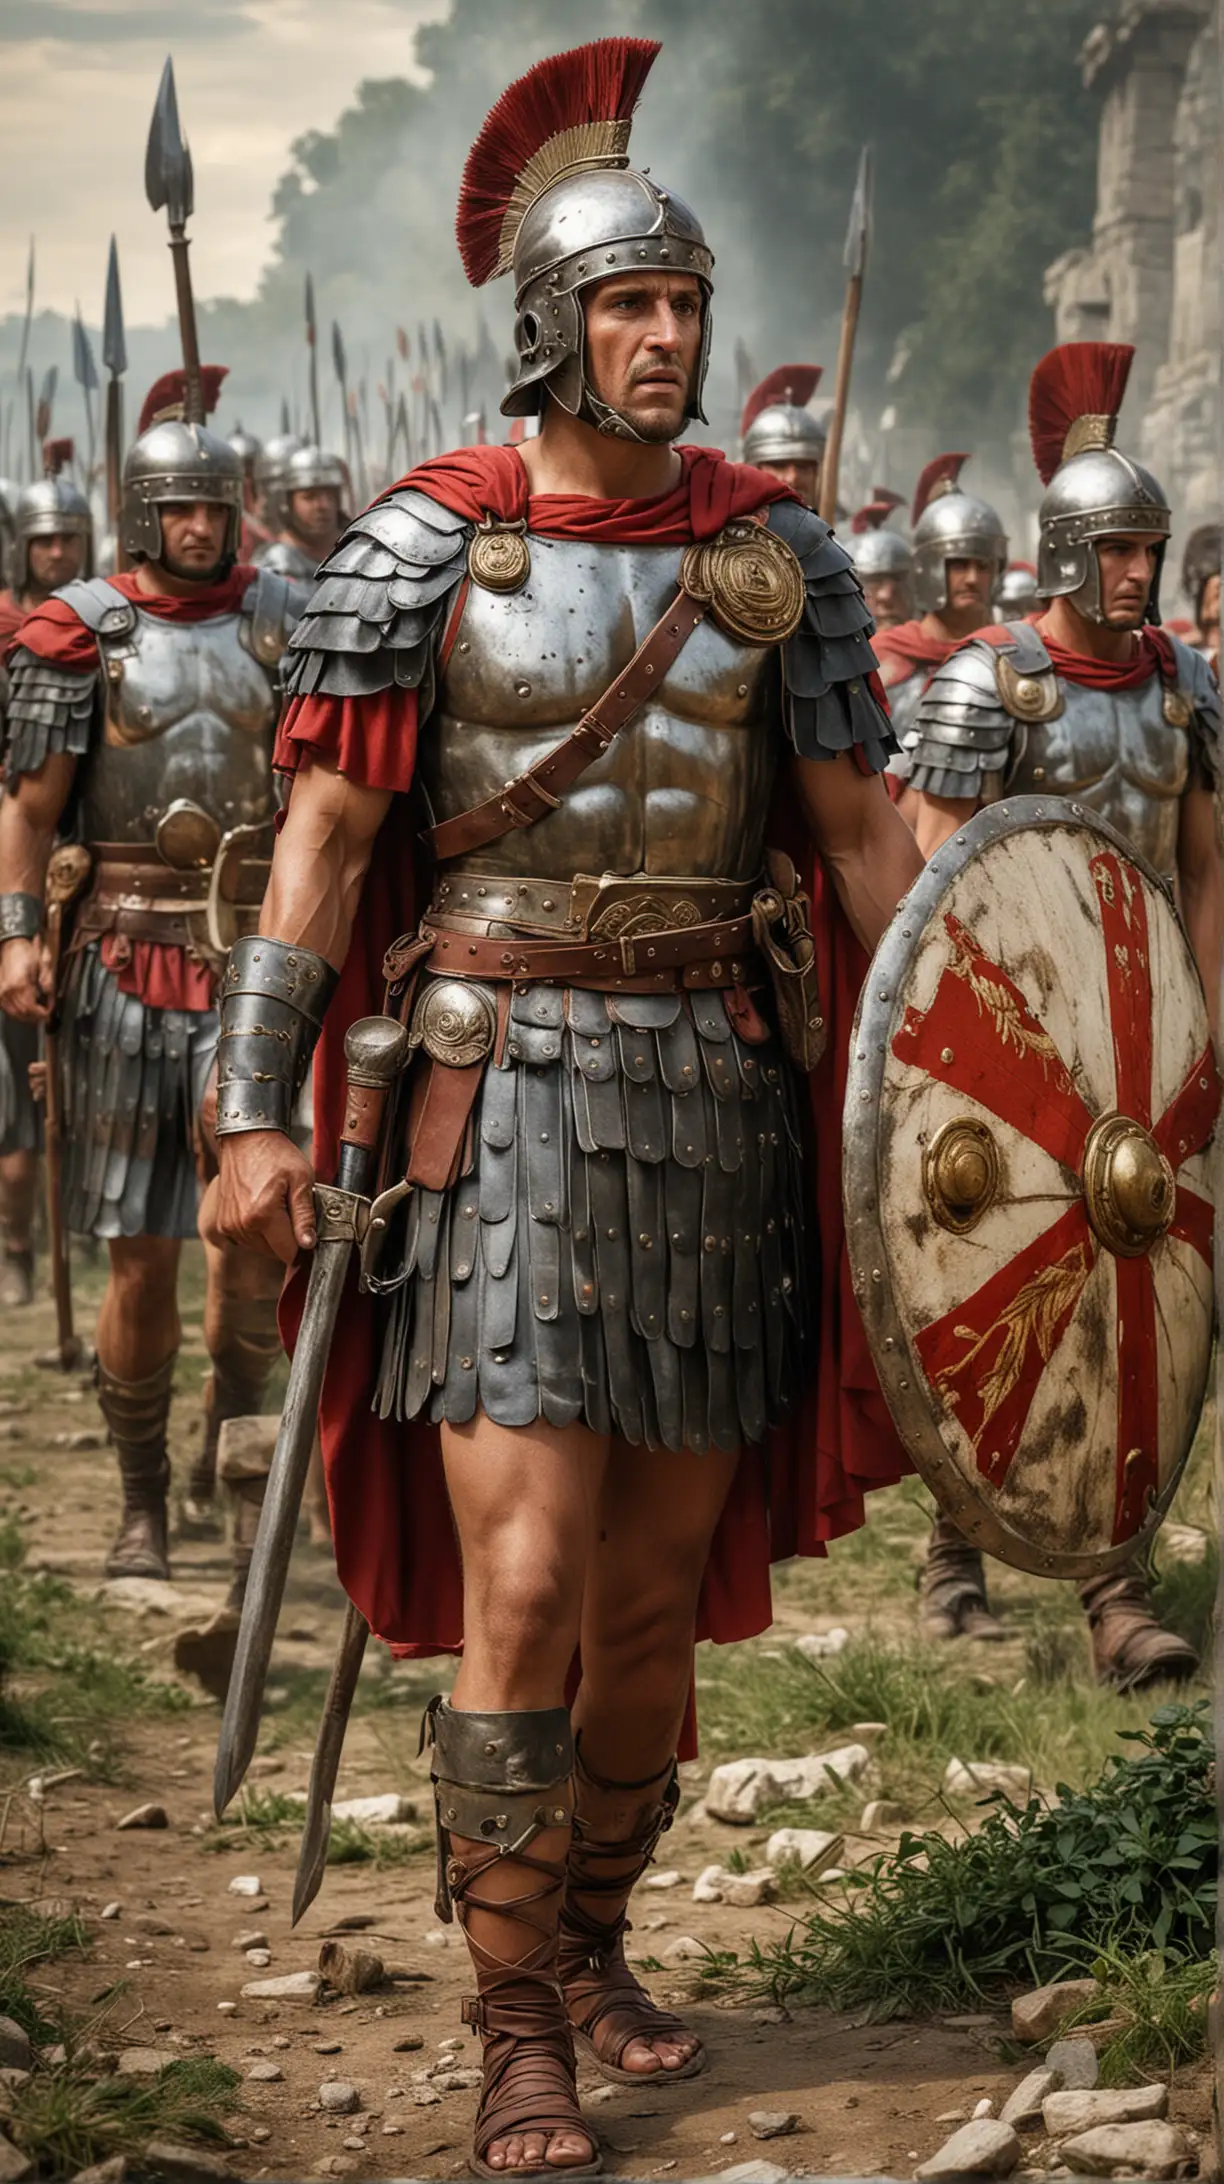 The Legionnaires were the backbone of the mighty Roman army, conquering vast territories and leaving an indelible mark on history
